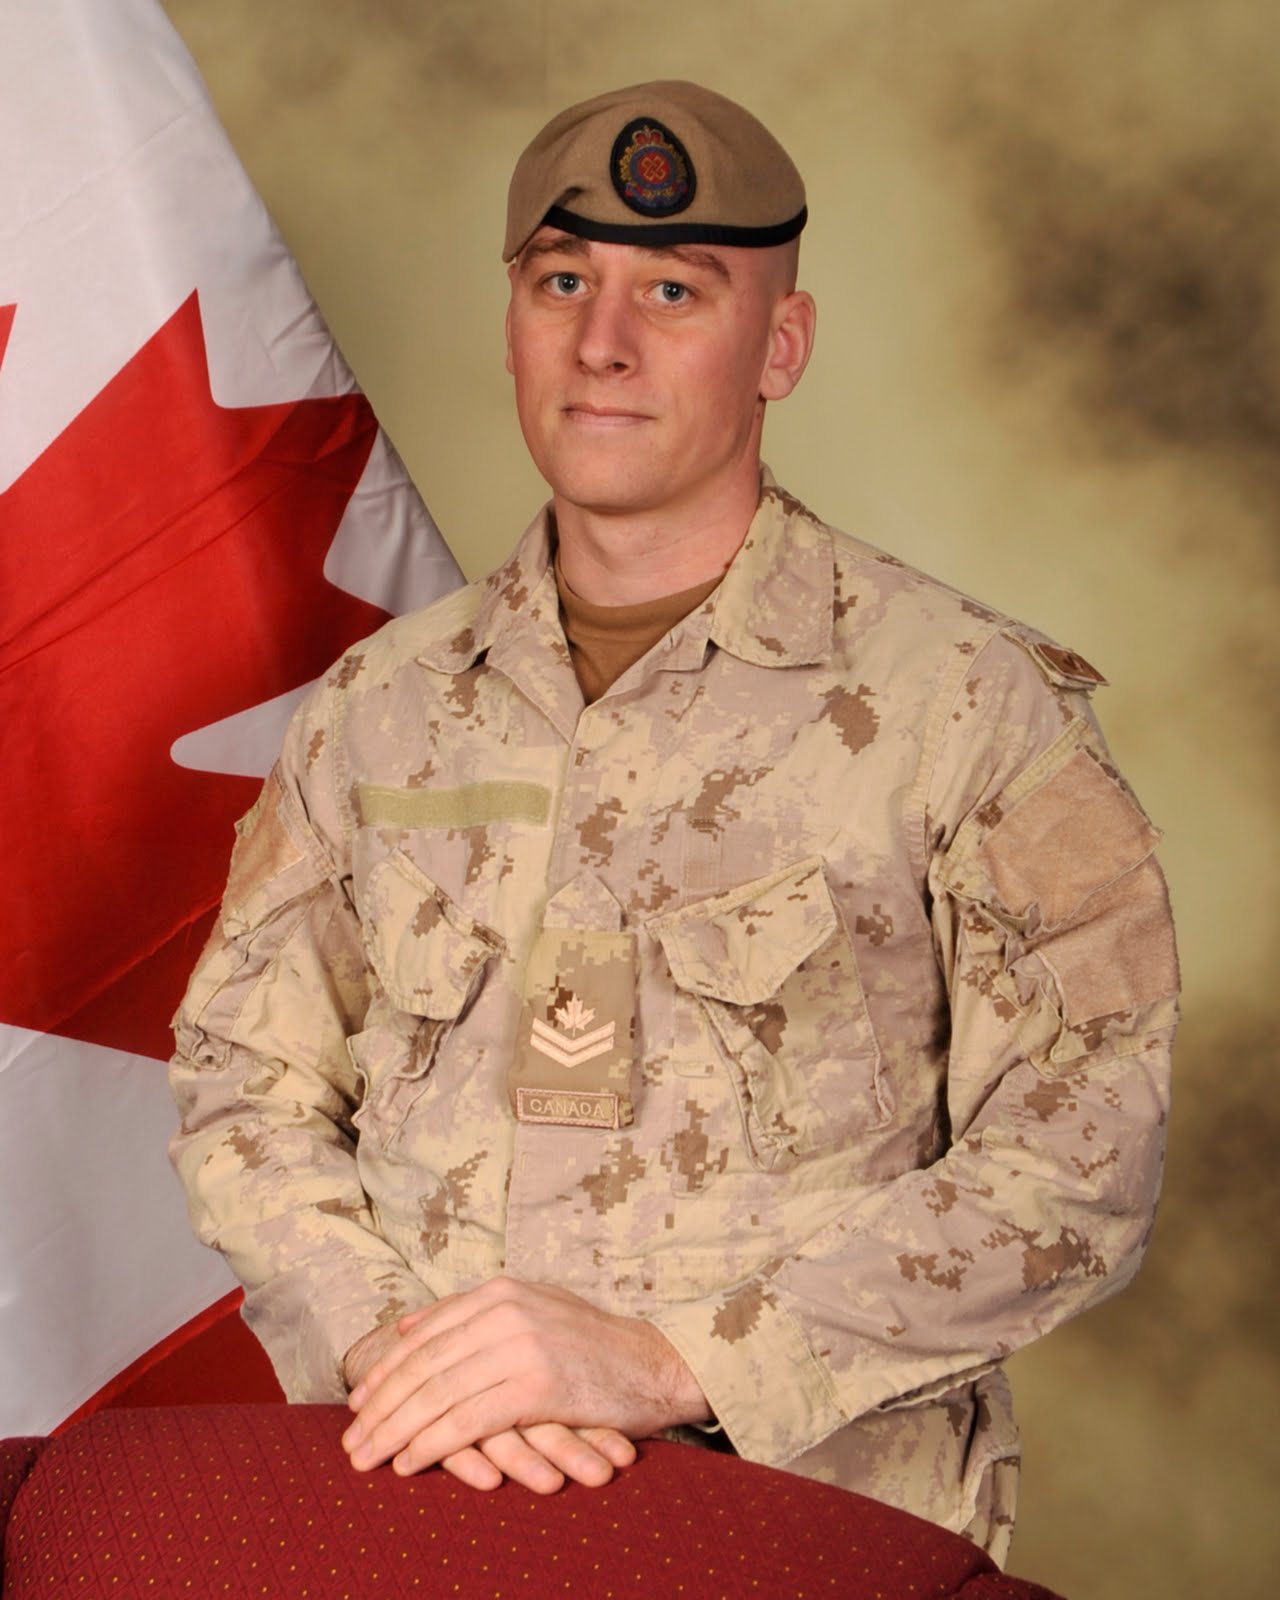 Assoluta Tranquillita: Some Gave All: Master Cpl. Francis Roy